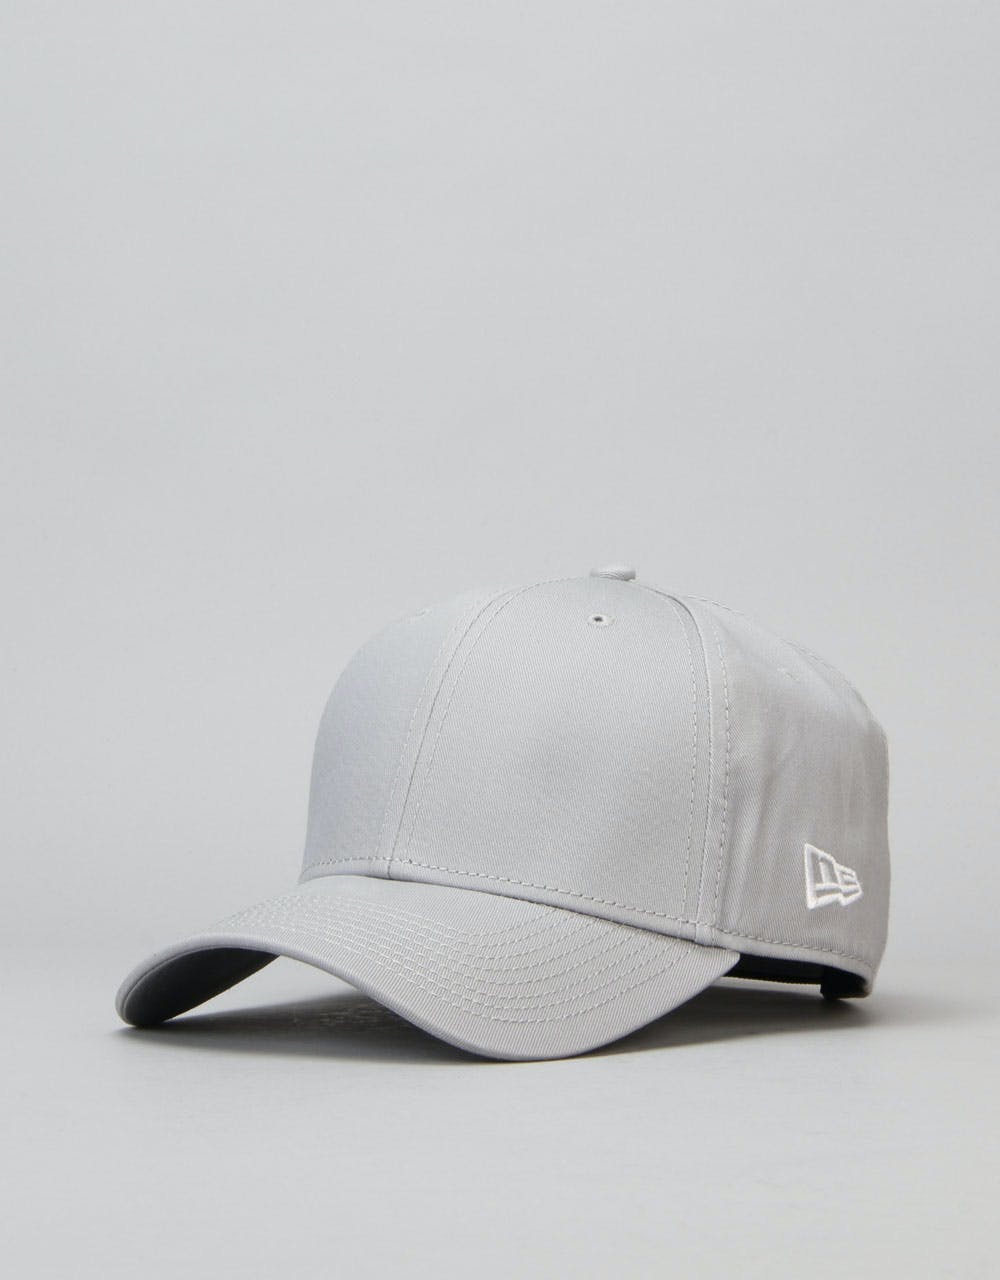 New Era 9Forty Flag Collection Cap - Grey/White